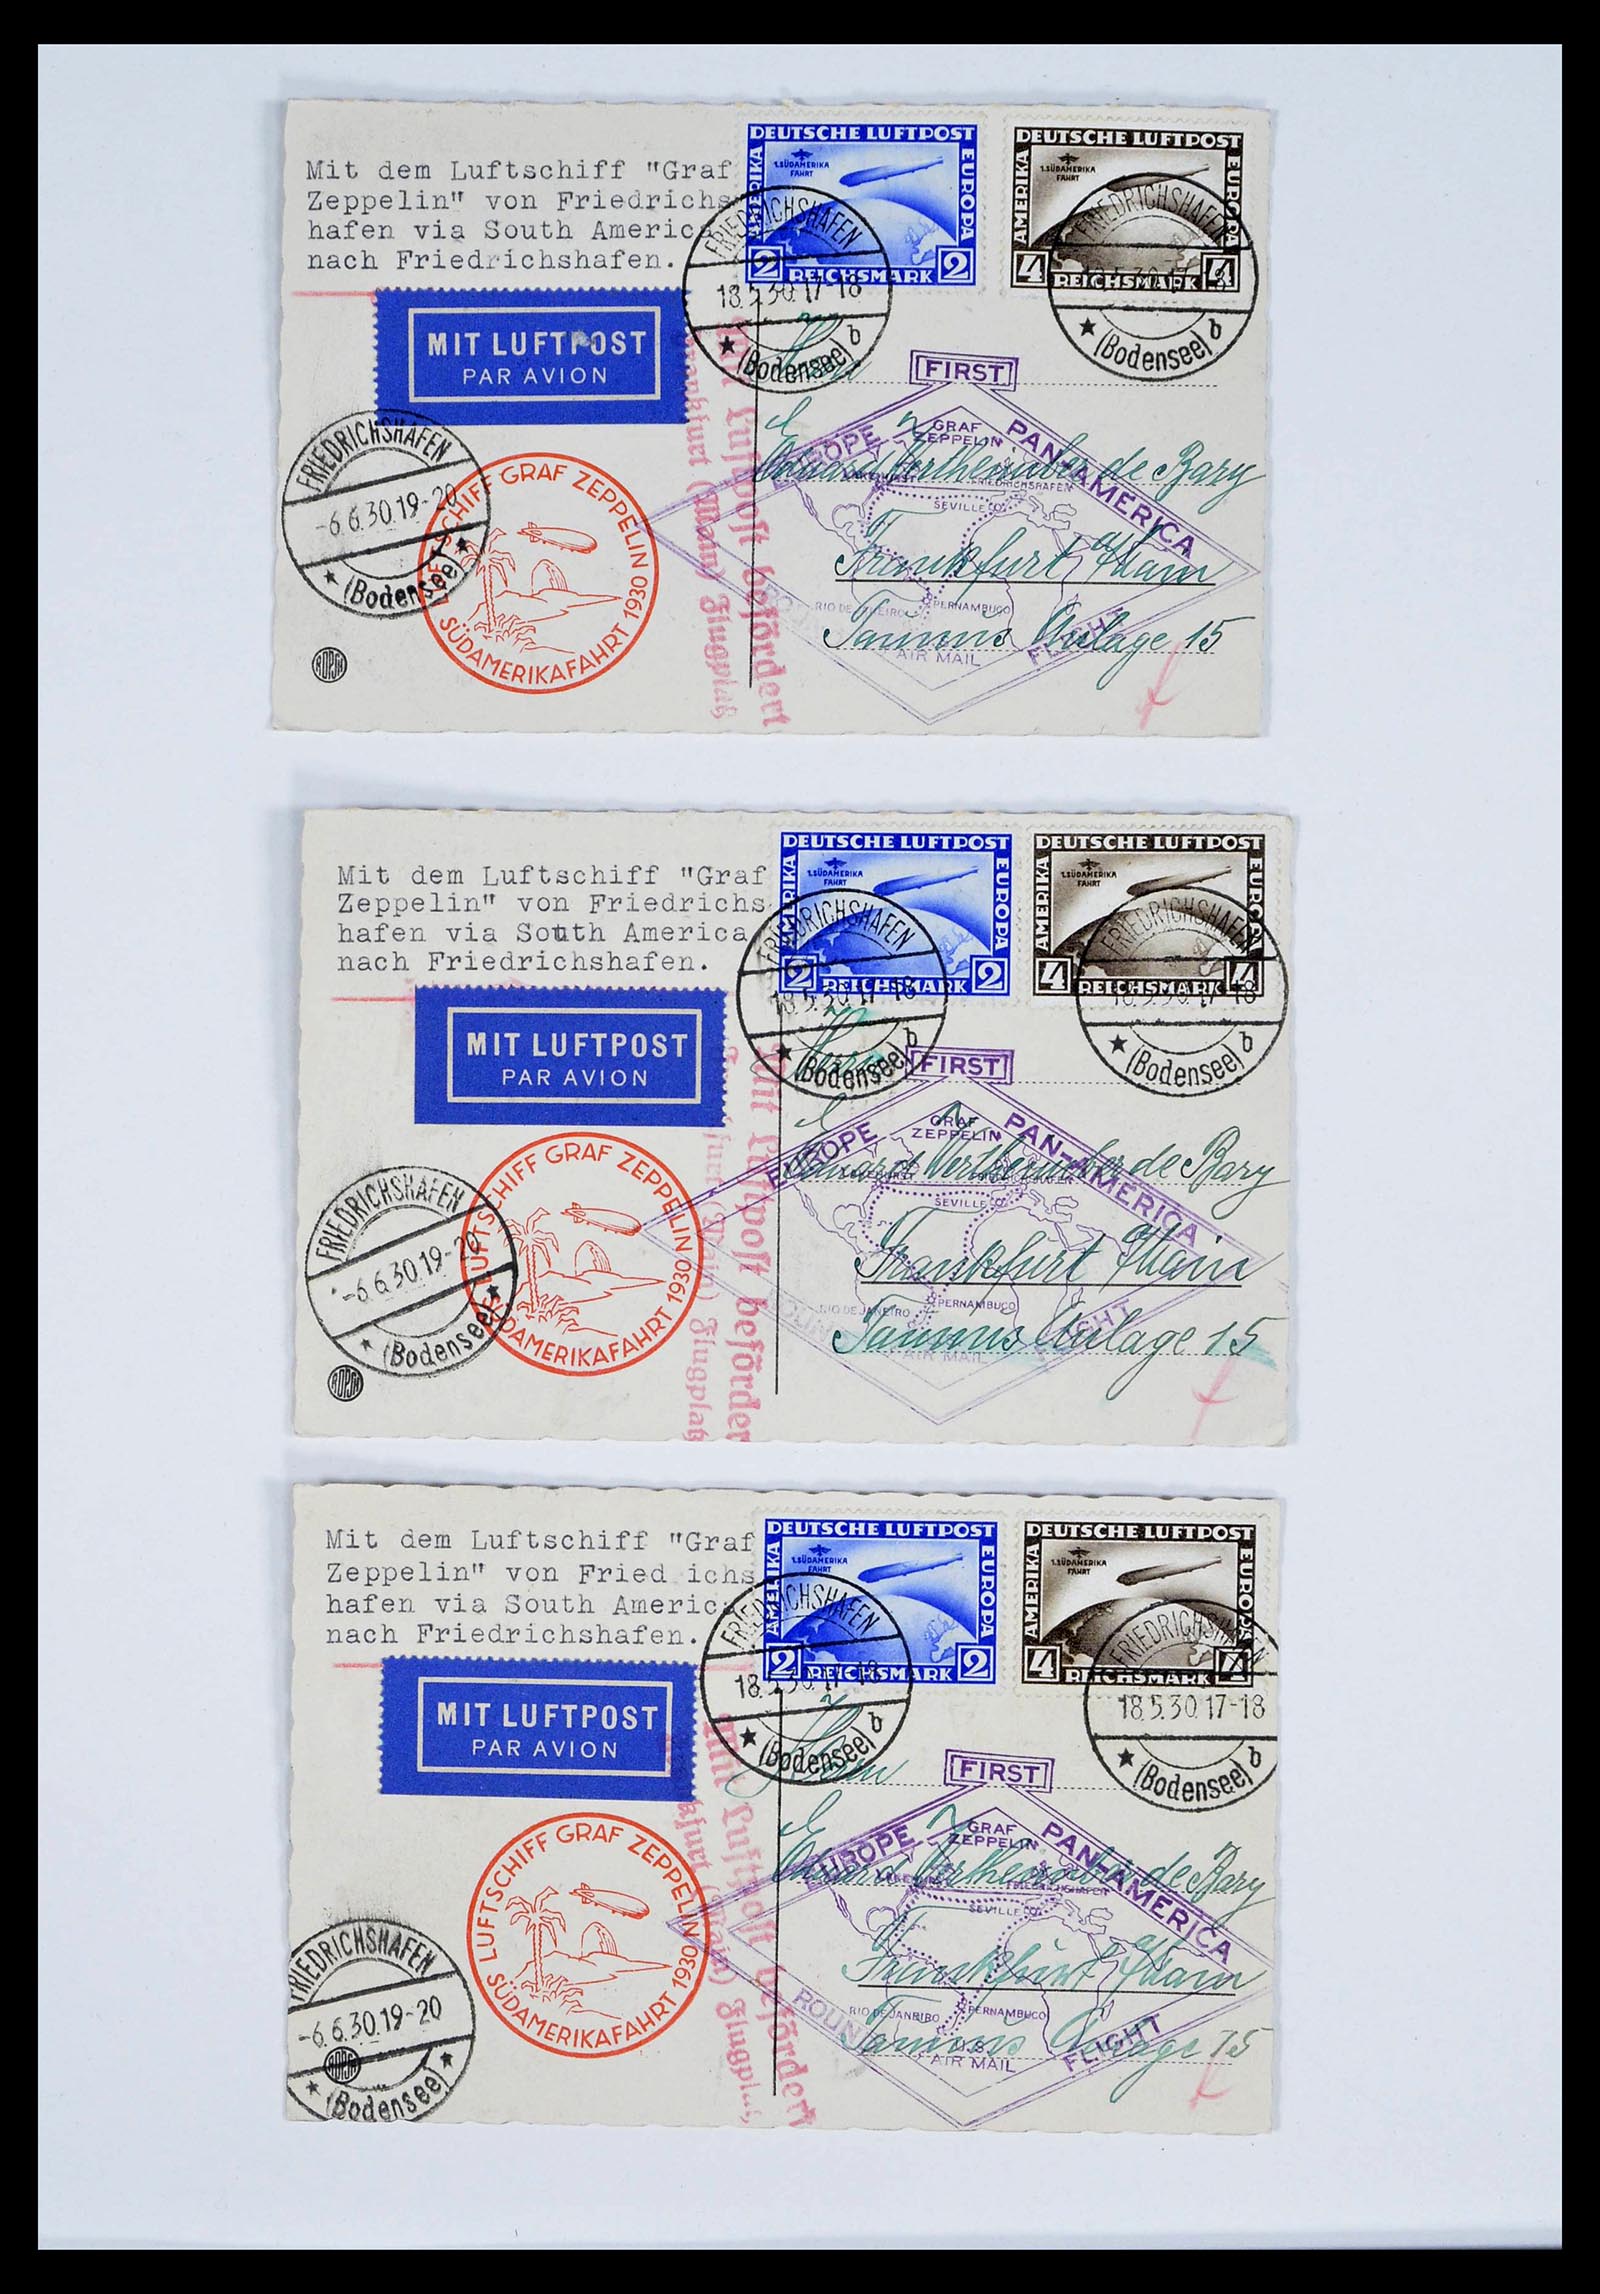 39032 0018 - Stamp collection 39032 Zeppelin covers 1928-1933.